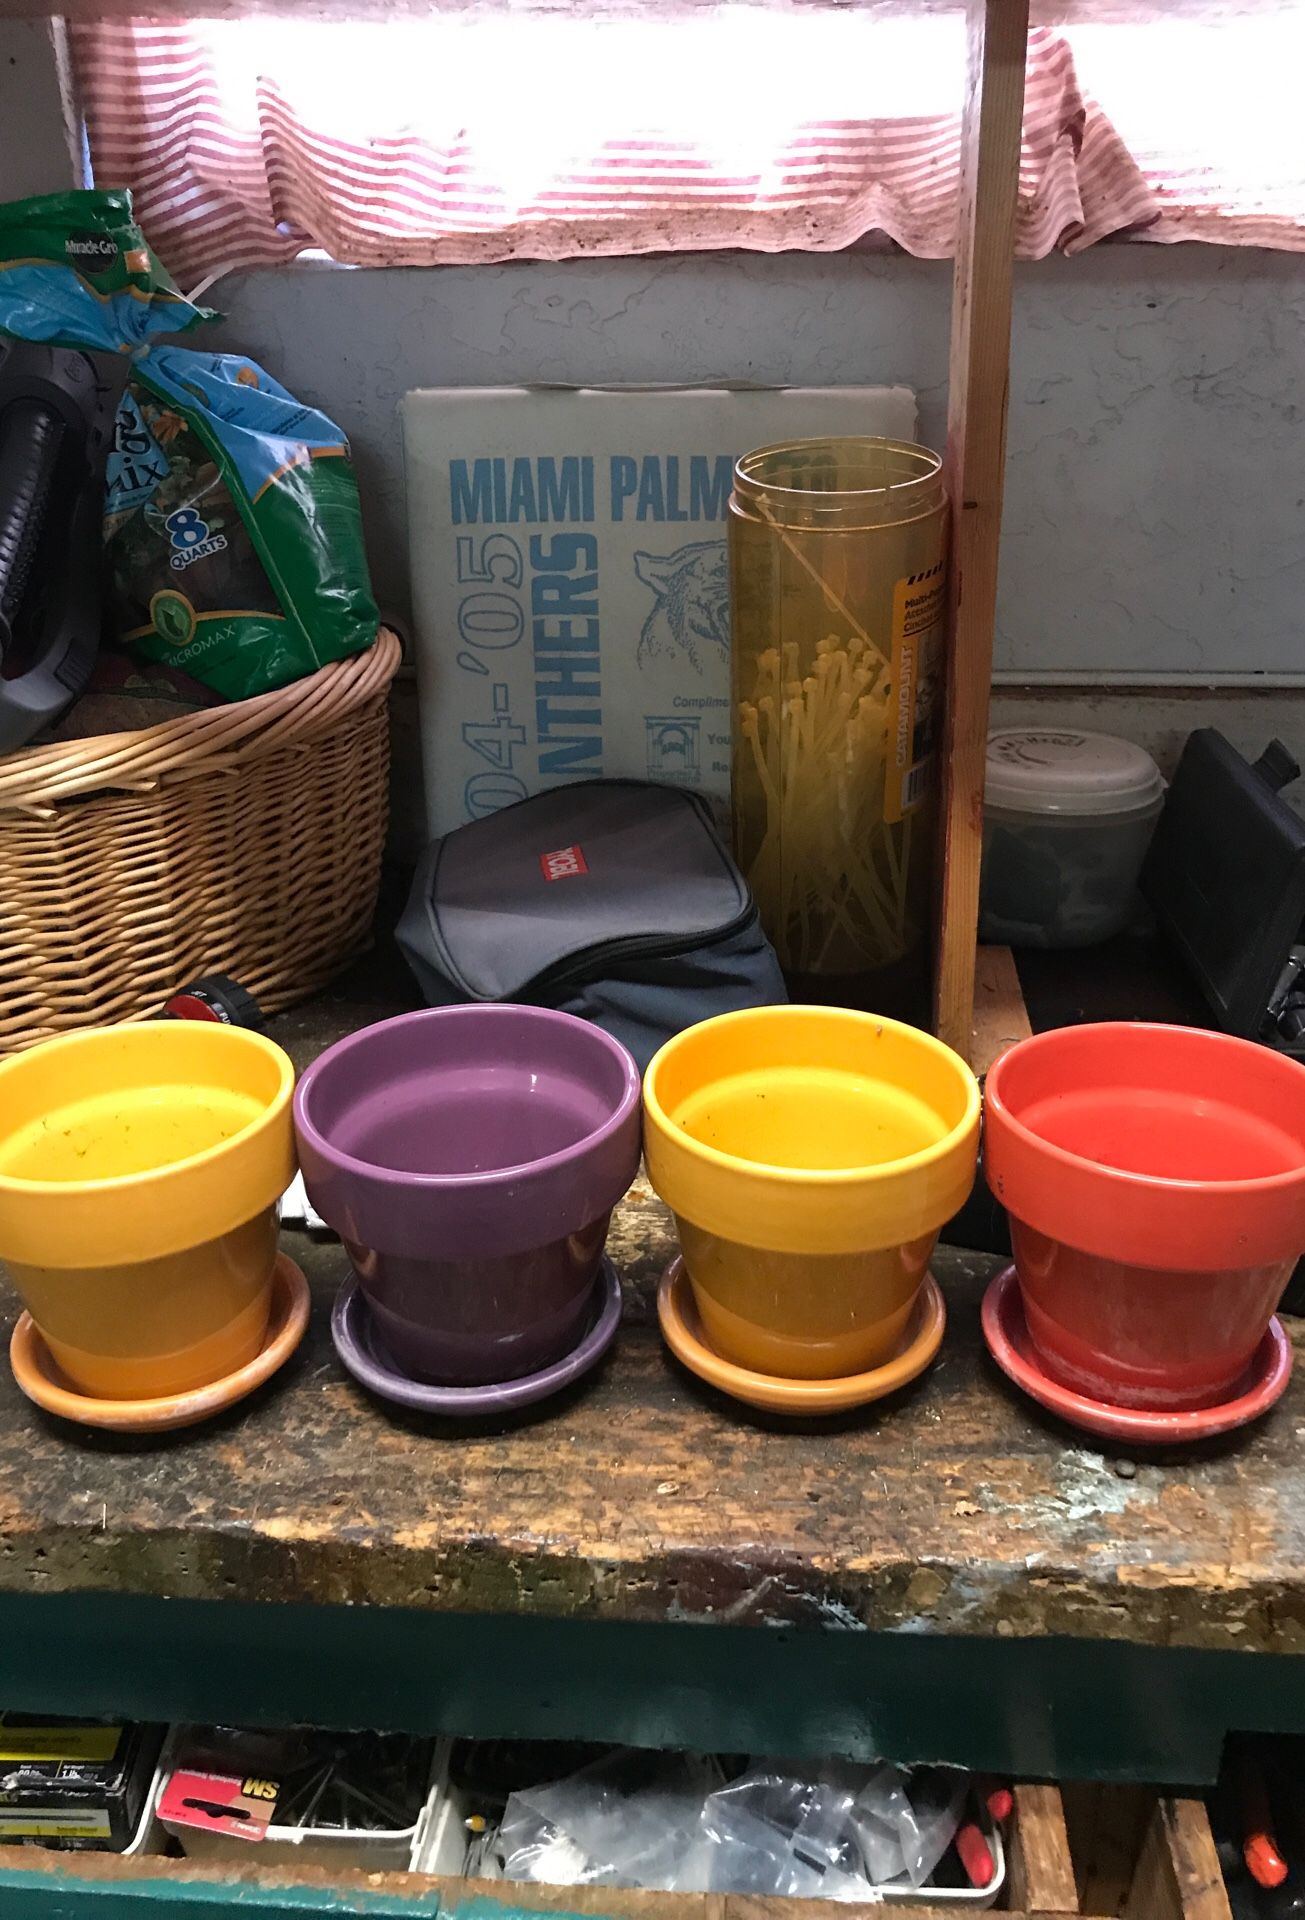 4 colorful plant pots with dish and draining hole